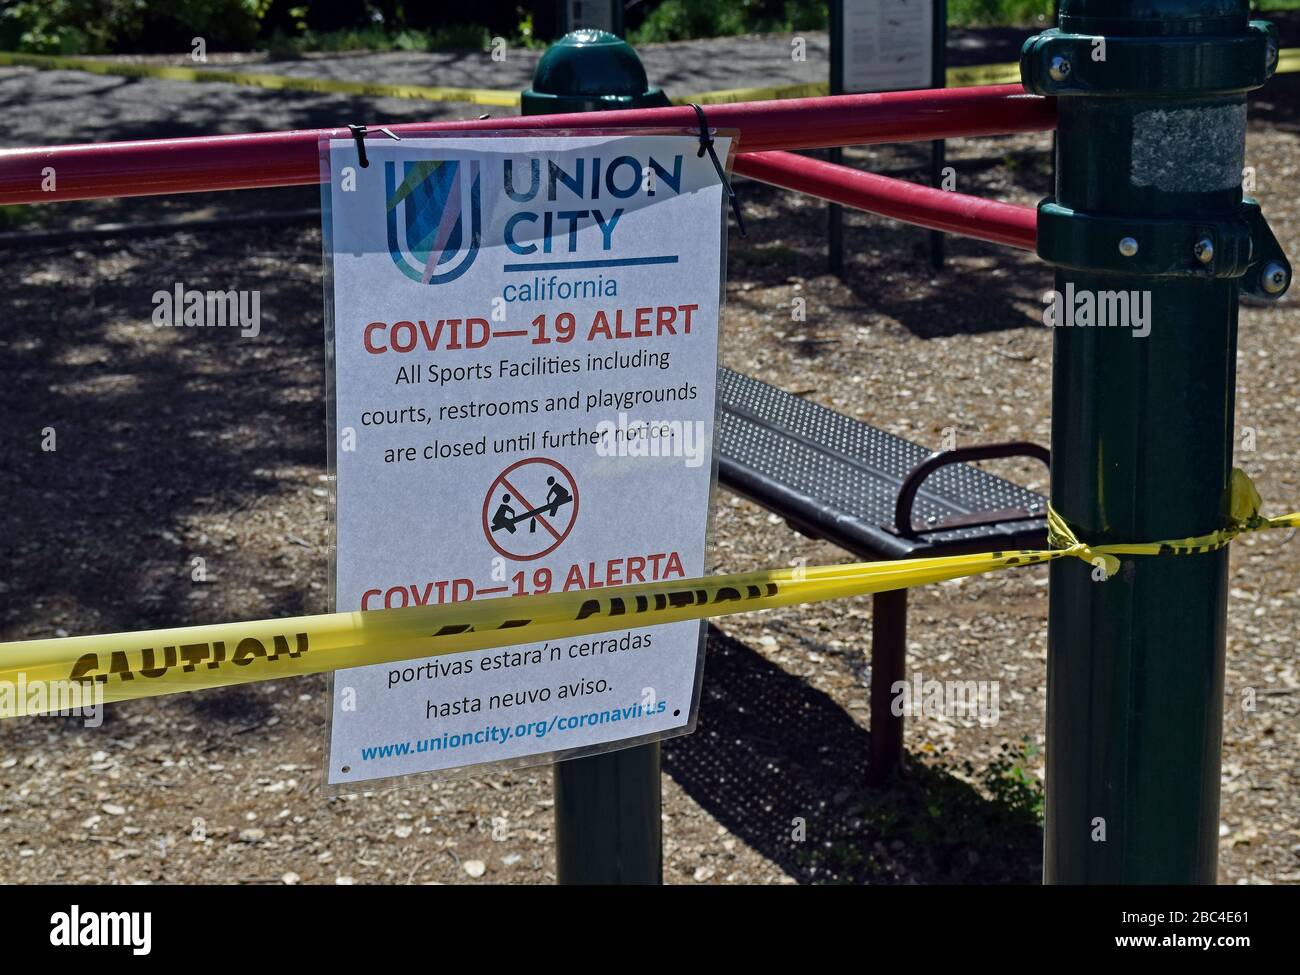 exercise area closed off with yellow caution tape due in Cann Park in Union City, due to covid-19 virus pandemic, California Stock Photo